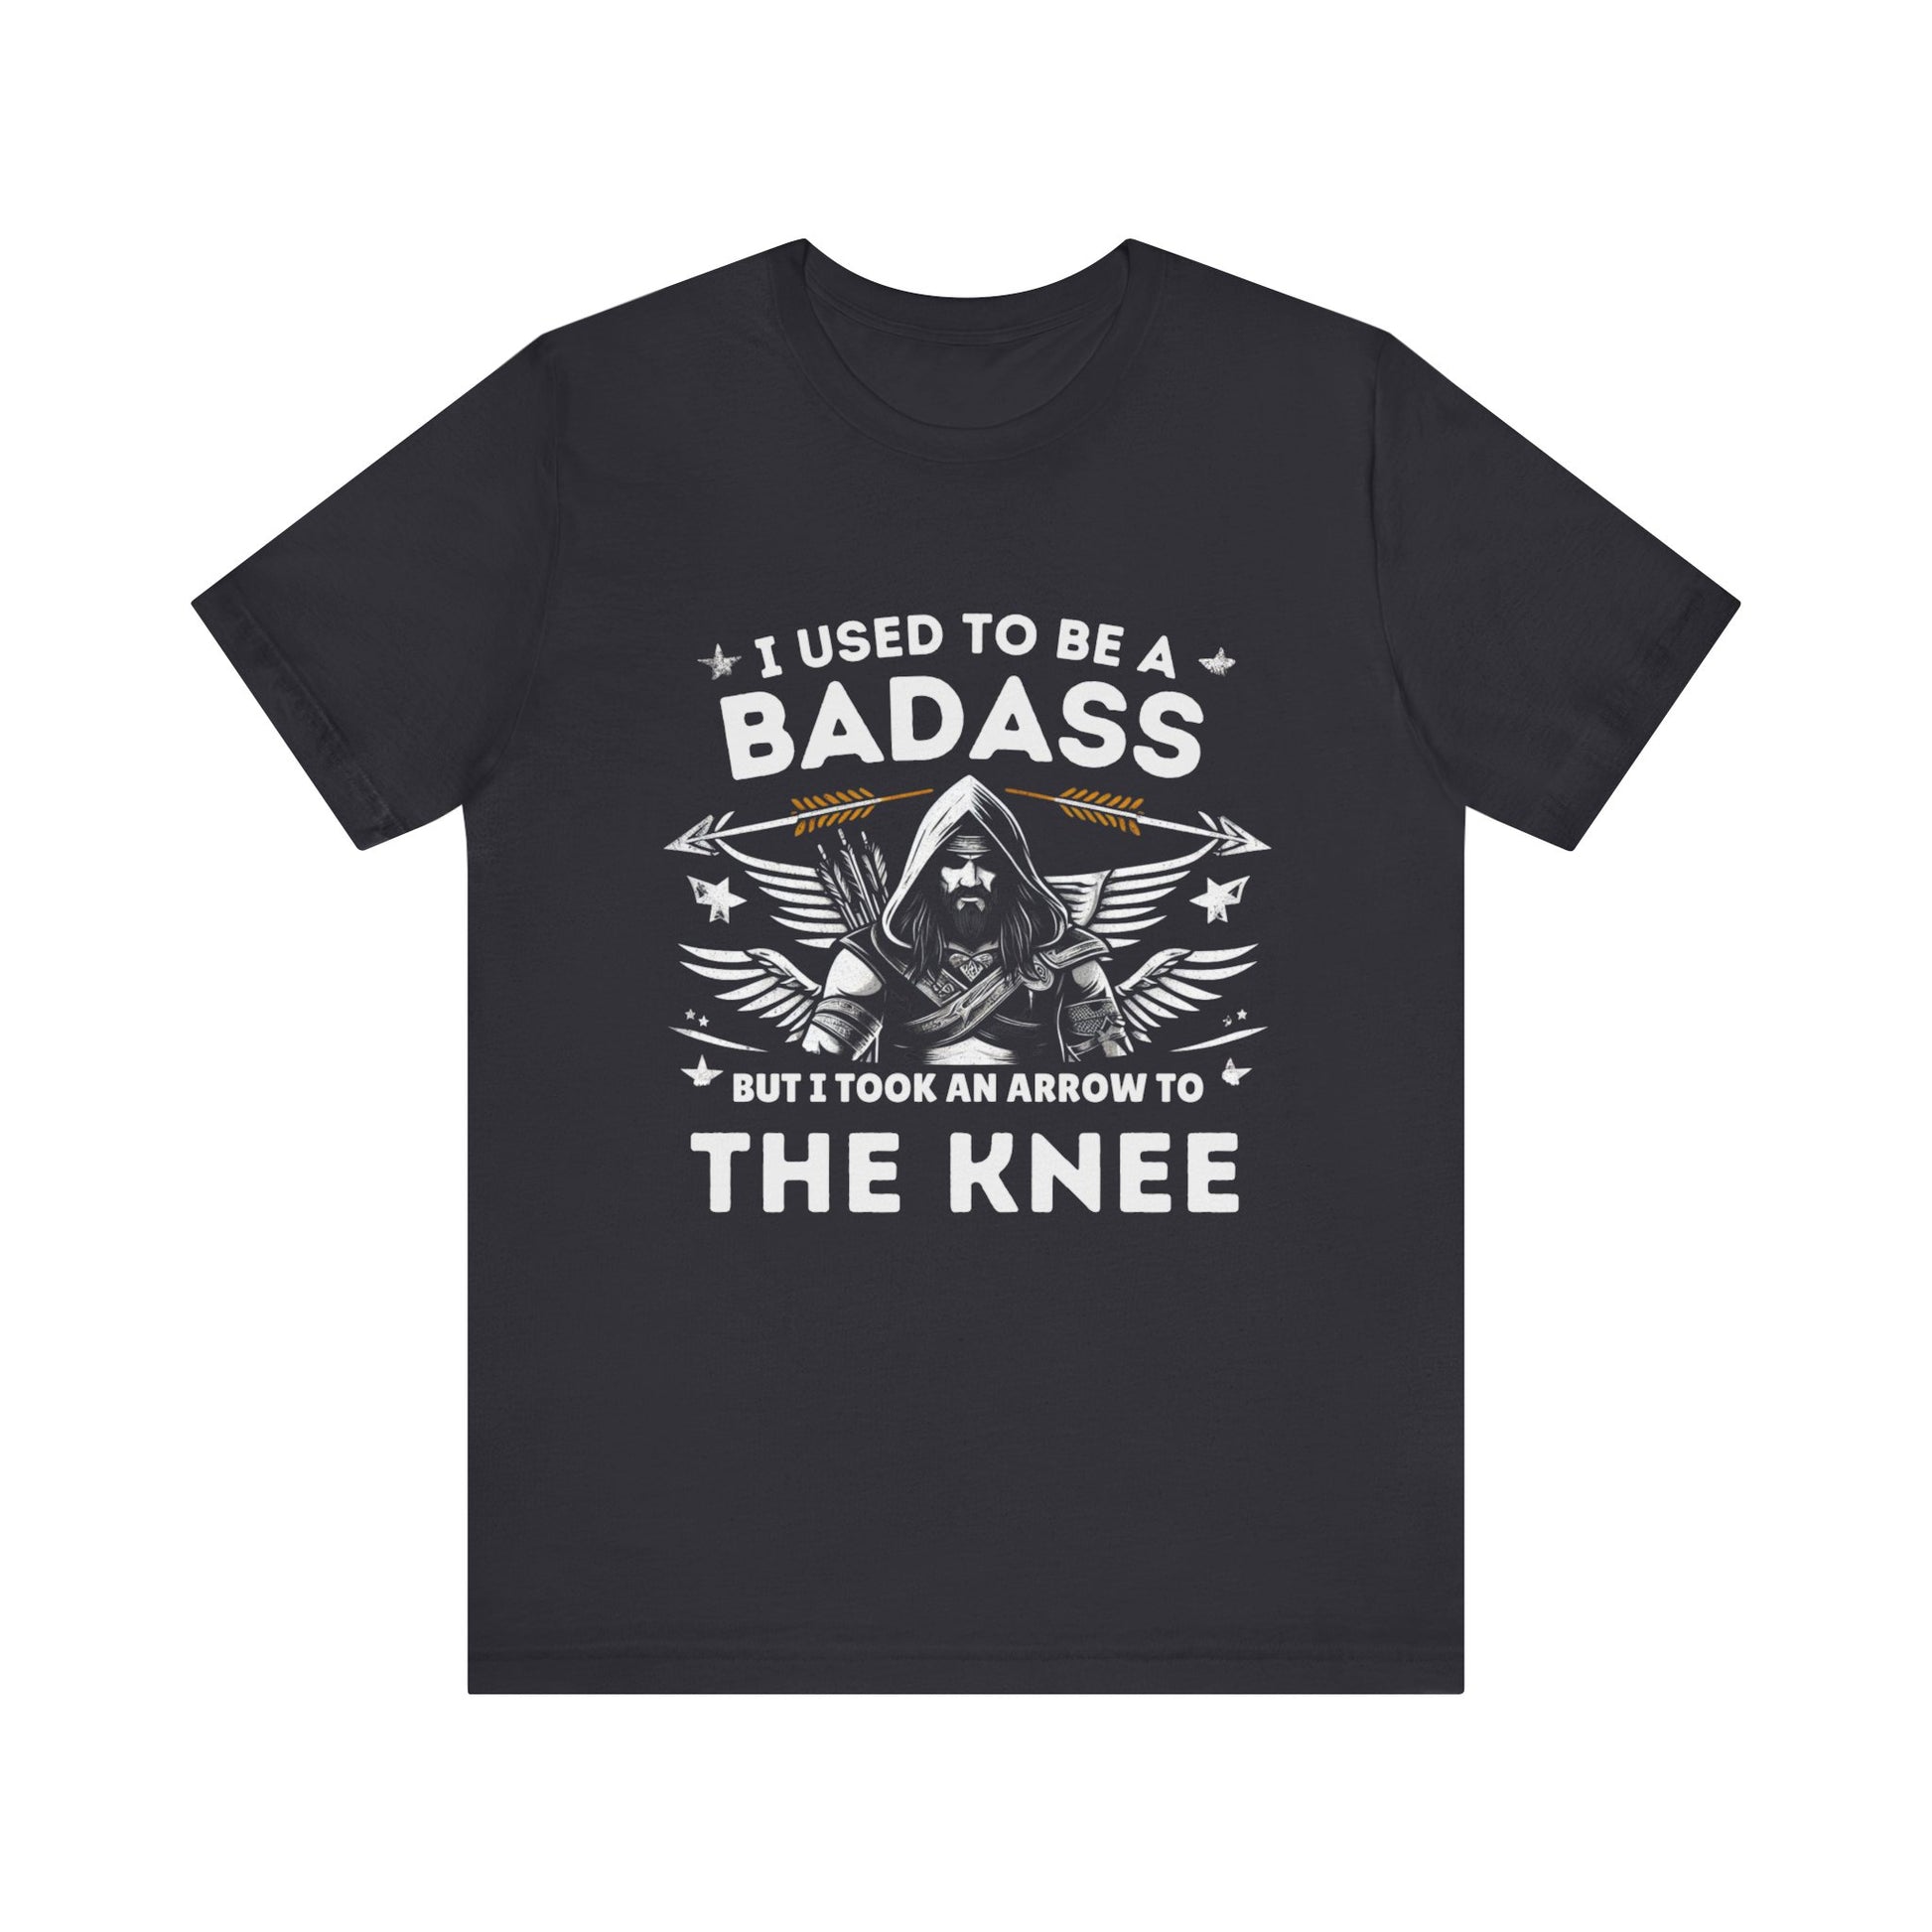 I Used to be a badass but I took an arrow to the Knee Tee Shirt |  Funny Unisex Short Sleeve Tee | Funny Gamer Shirt | Skyrim Style Gamer - CrazyTomTShirts